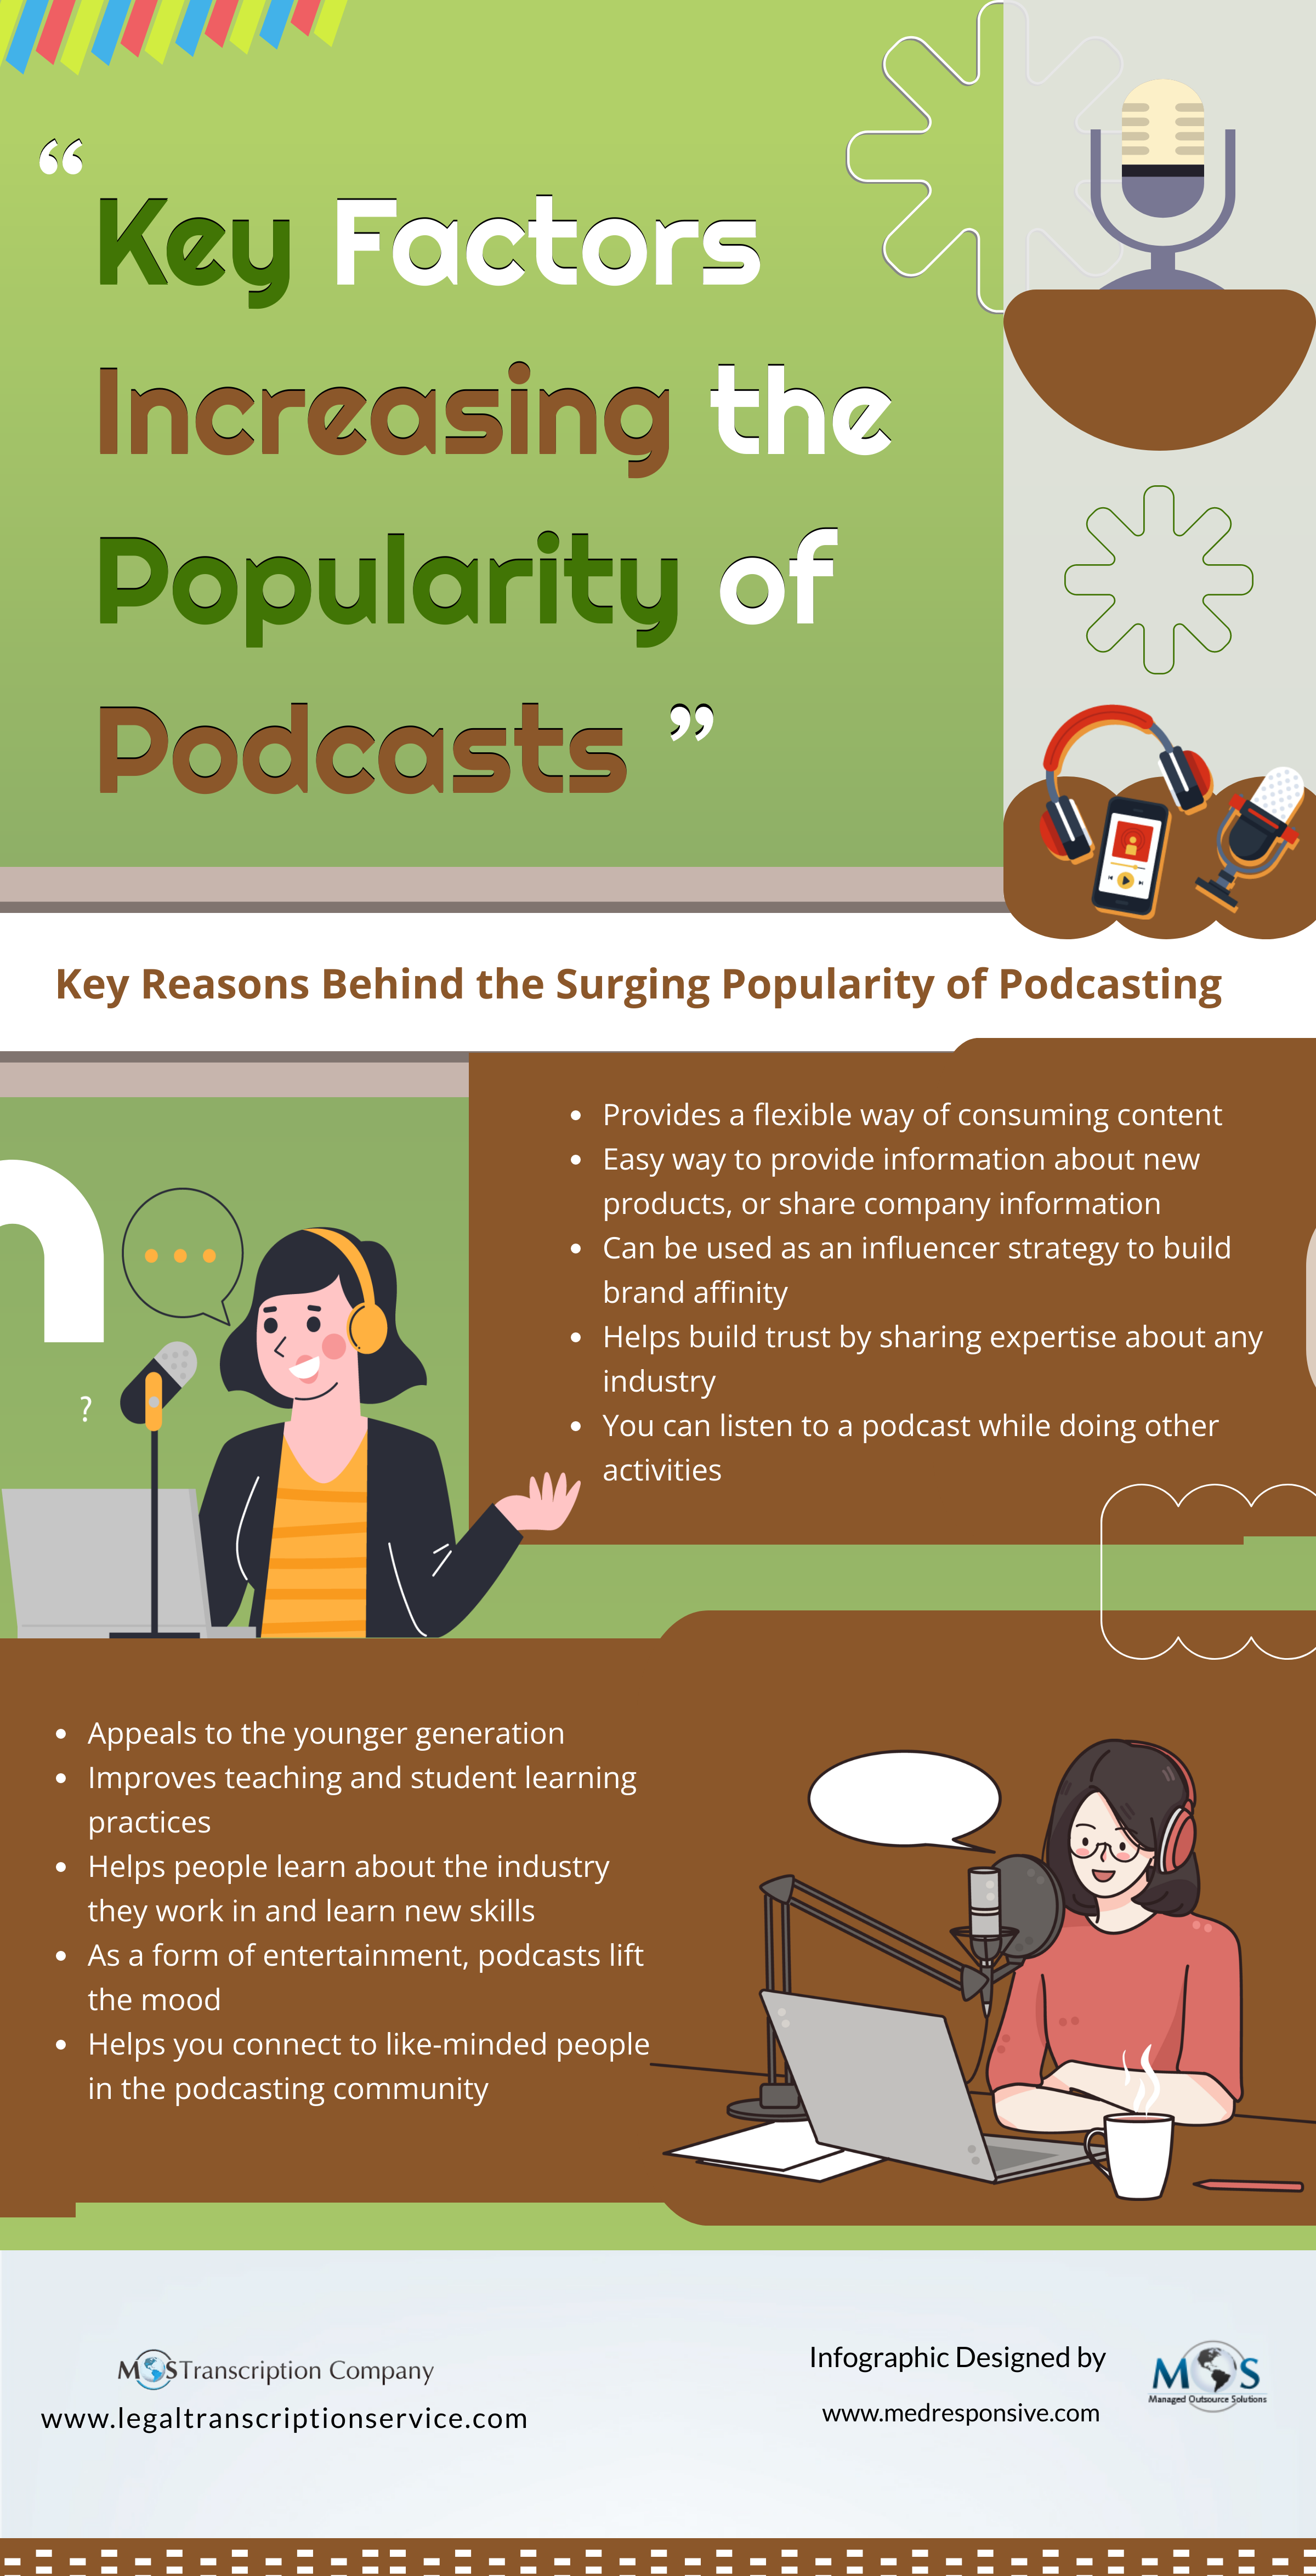 Key Factors Increasing the Popularity of Podcasts